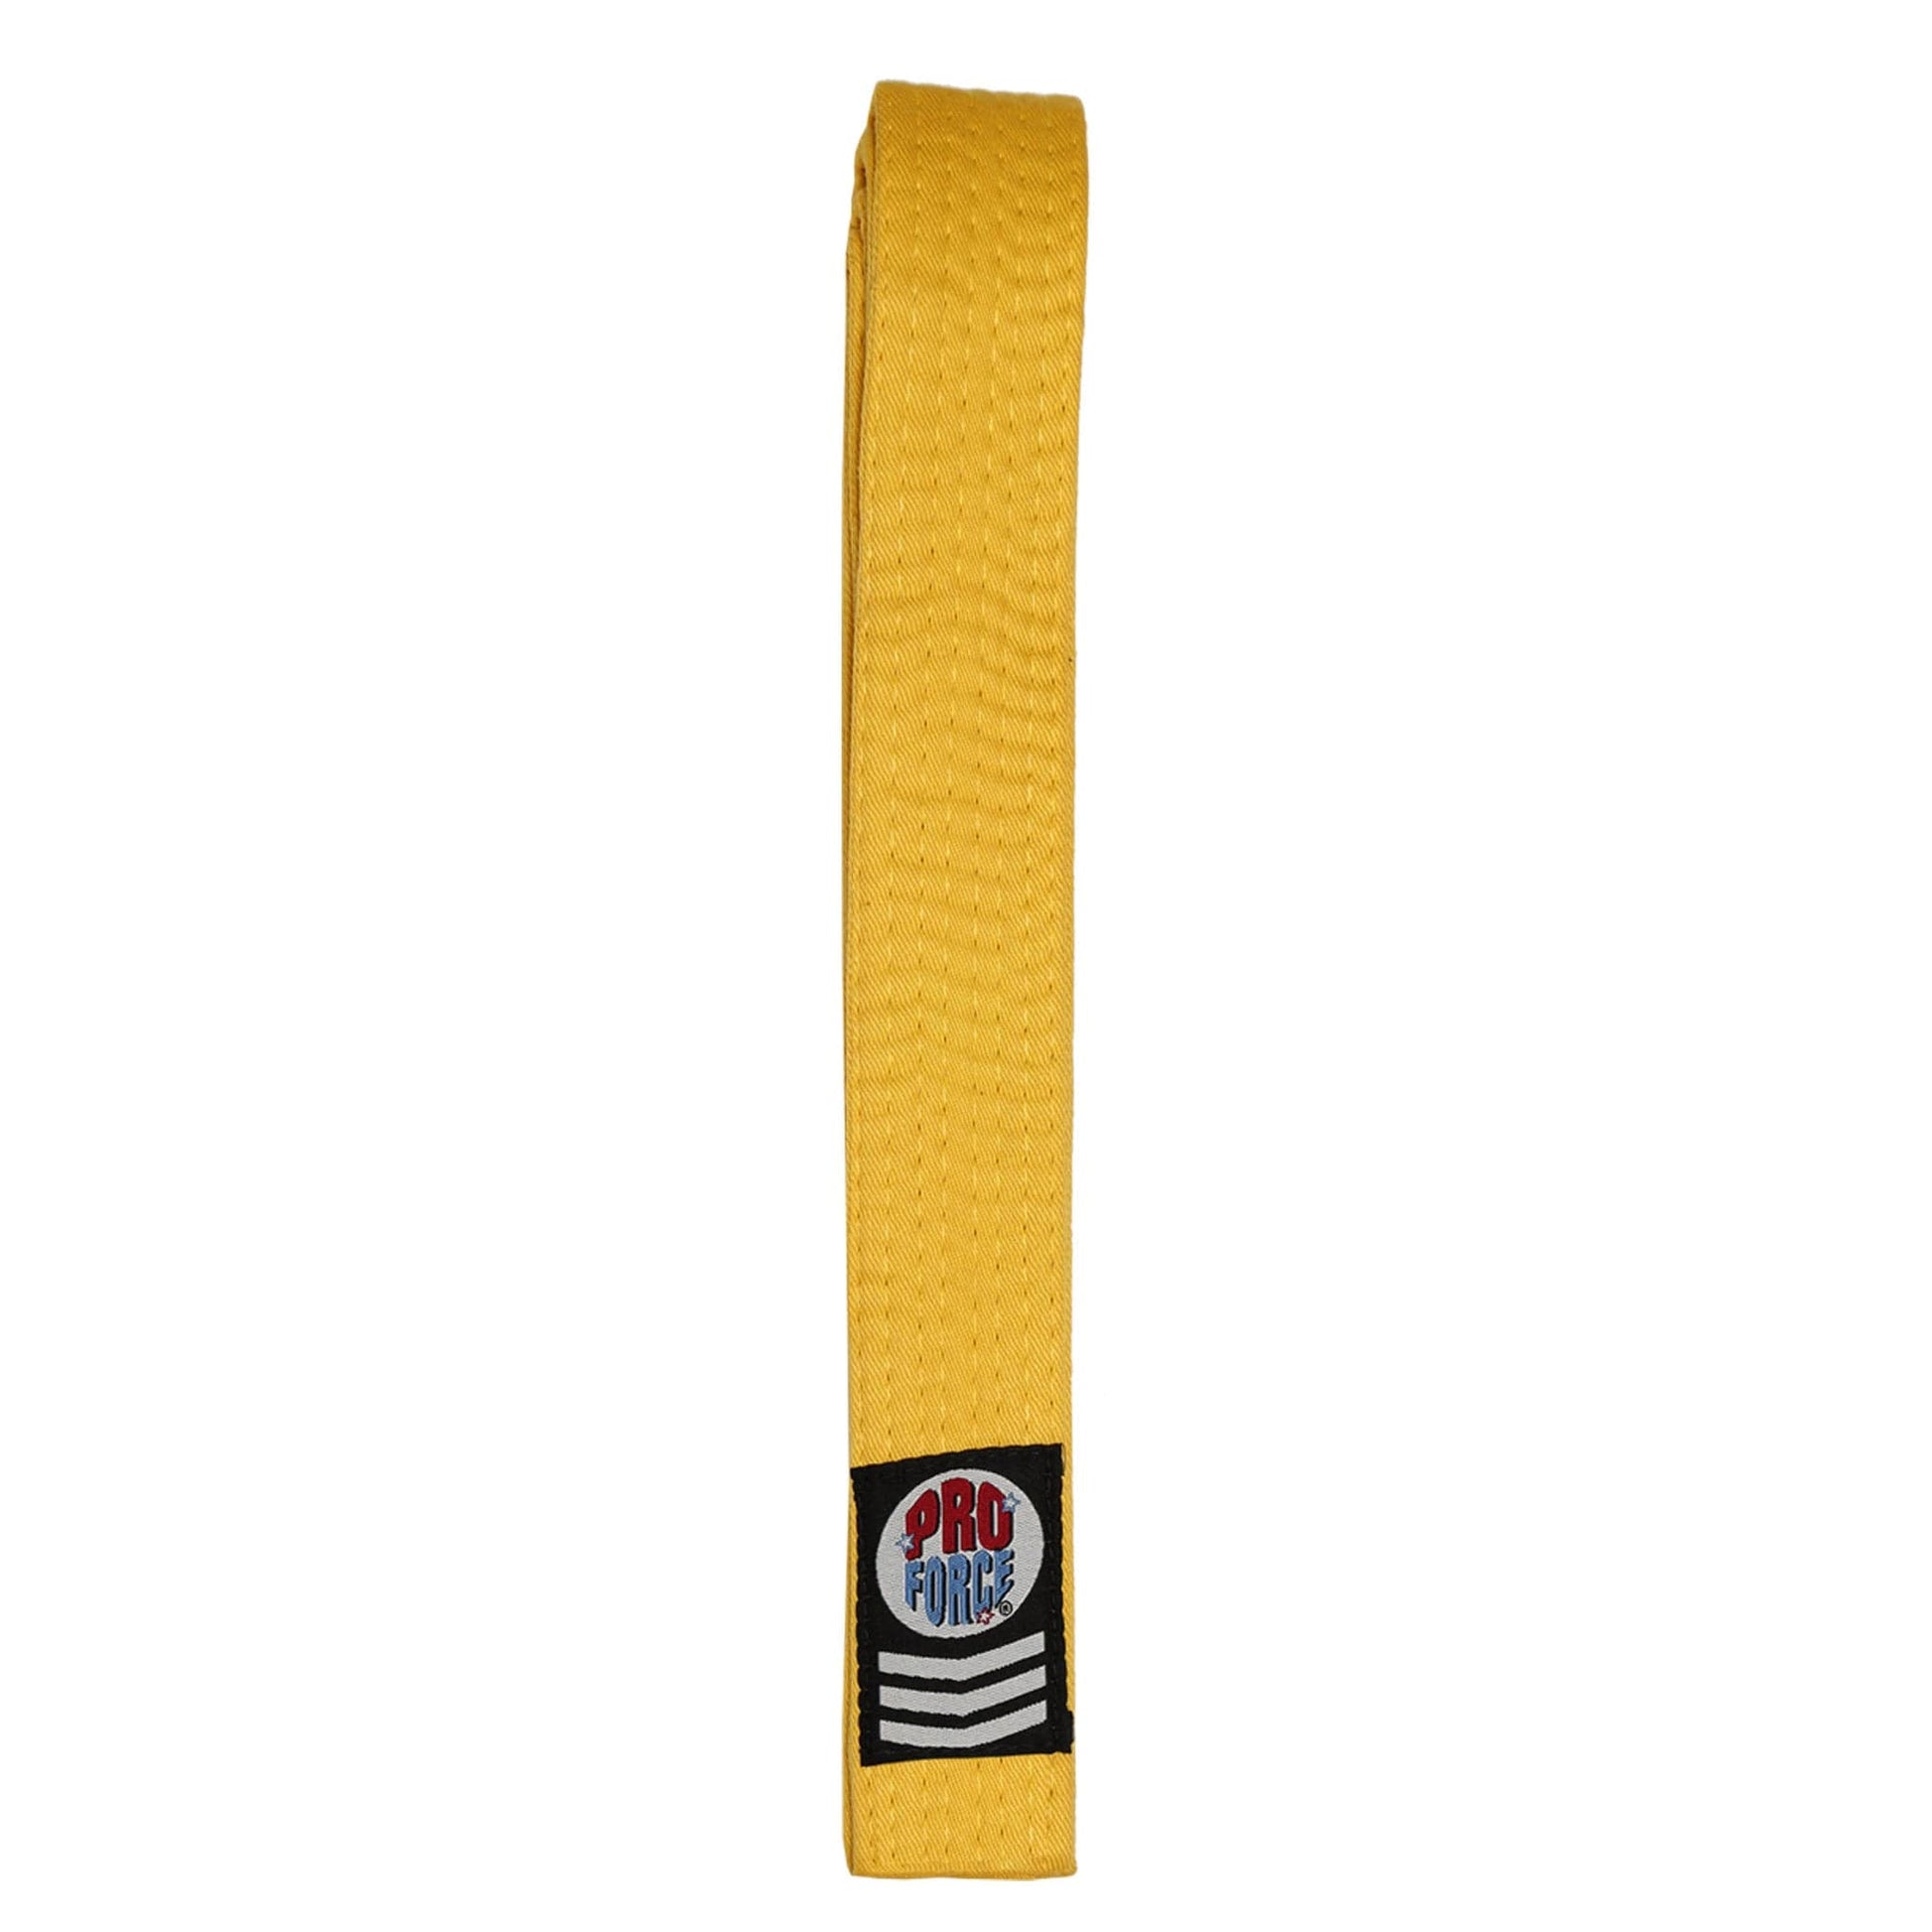 EclipseMartialArtsSupplies sporting goods Yellow / 0 child small ProForce II 1.5 inch Double Wrap Solid Karate Belts